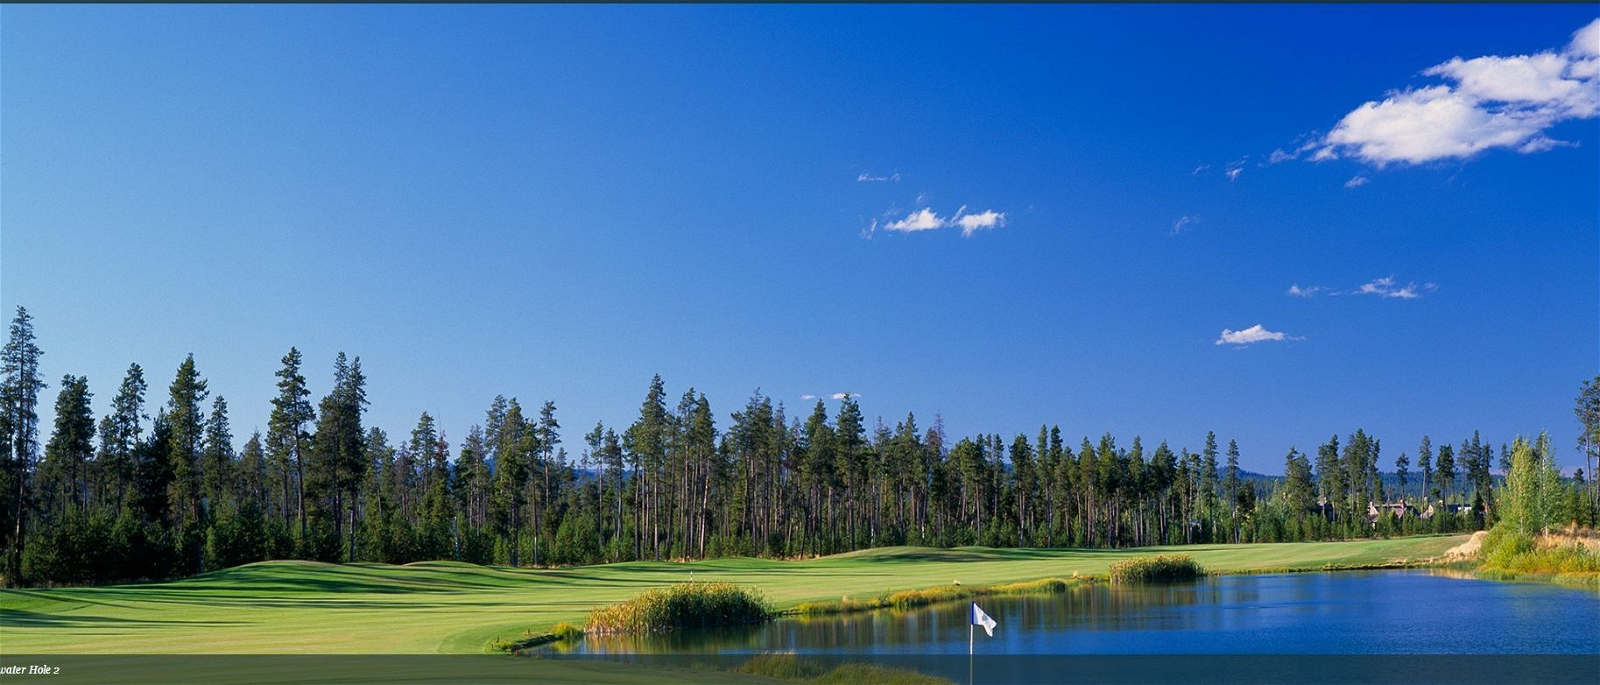 Golf Vacation Package - Sunriver Resort - Crosswater Course